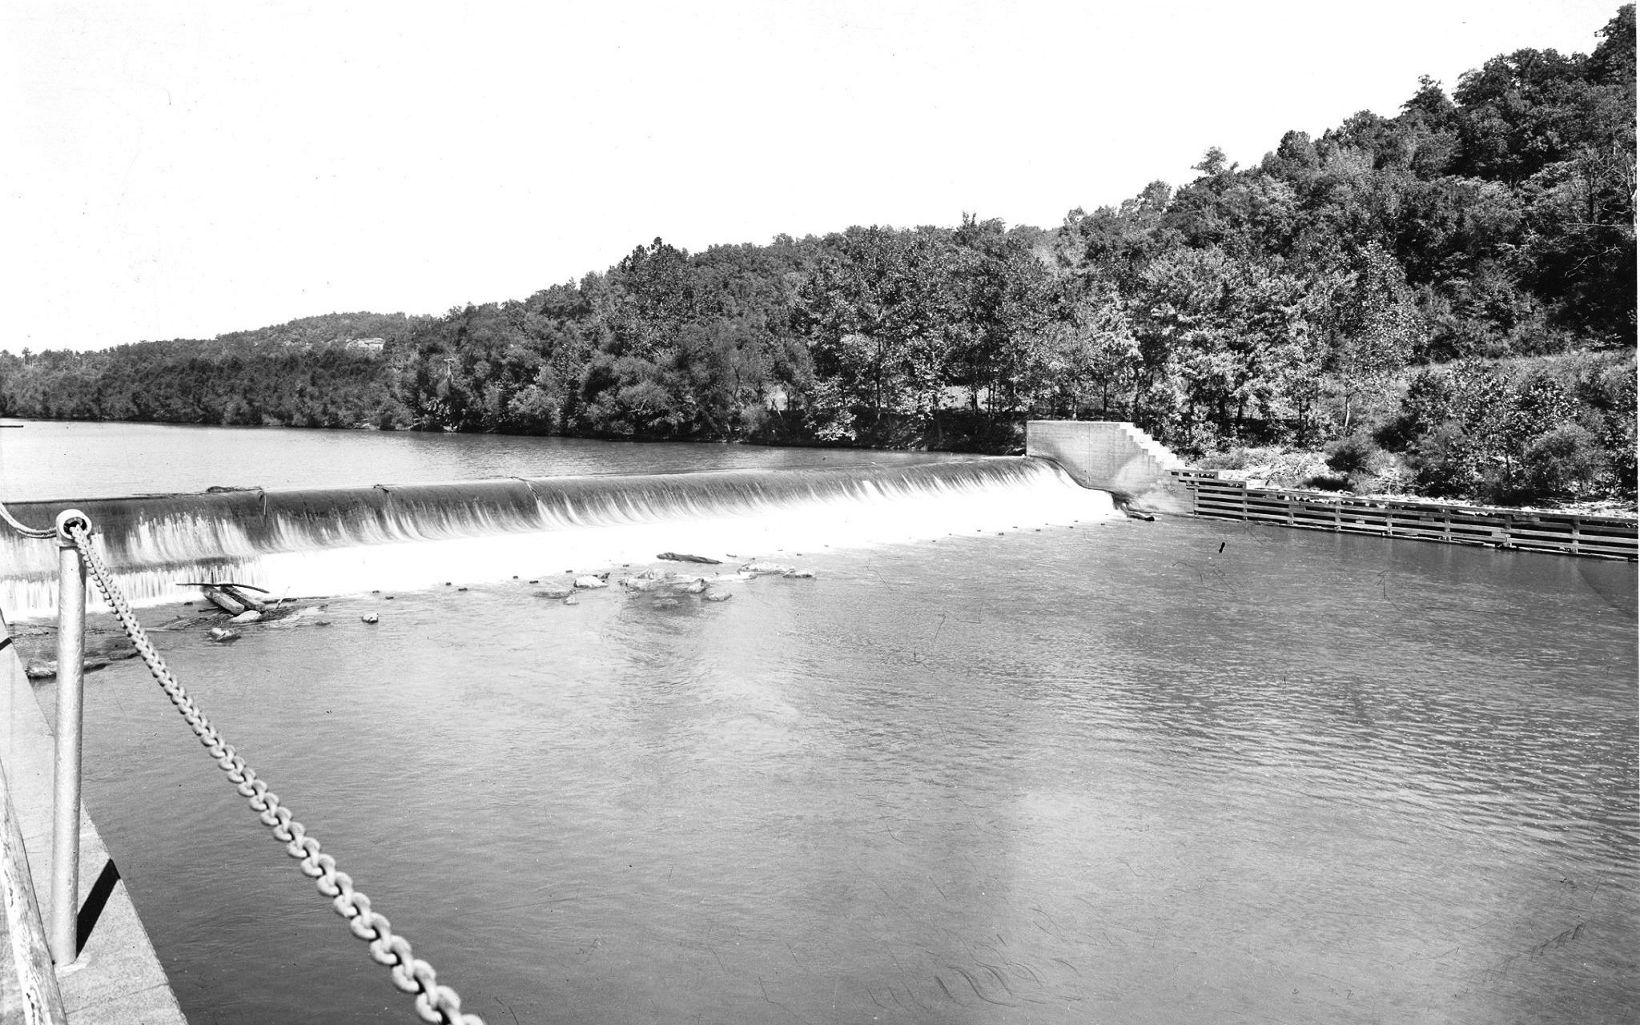 Open For Business   Wooden barges hauled asphaltic sandstone mined at Kyrock for paving. Packet boats hauled other cargo in both directions, including early visitors to Mammoth Cave. © U.S. Army Corps of Engineers